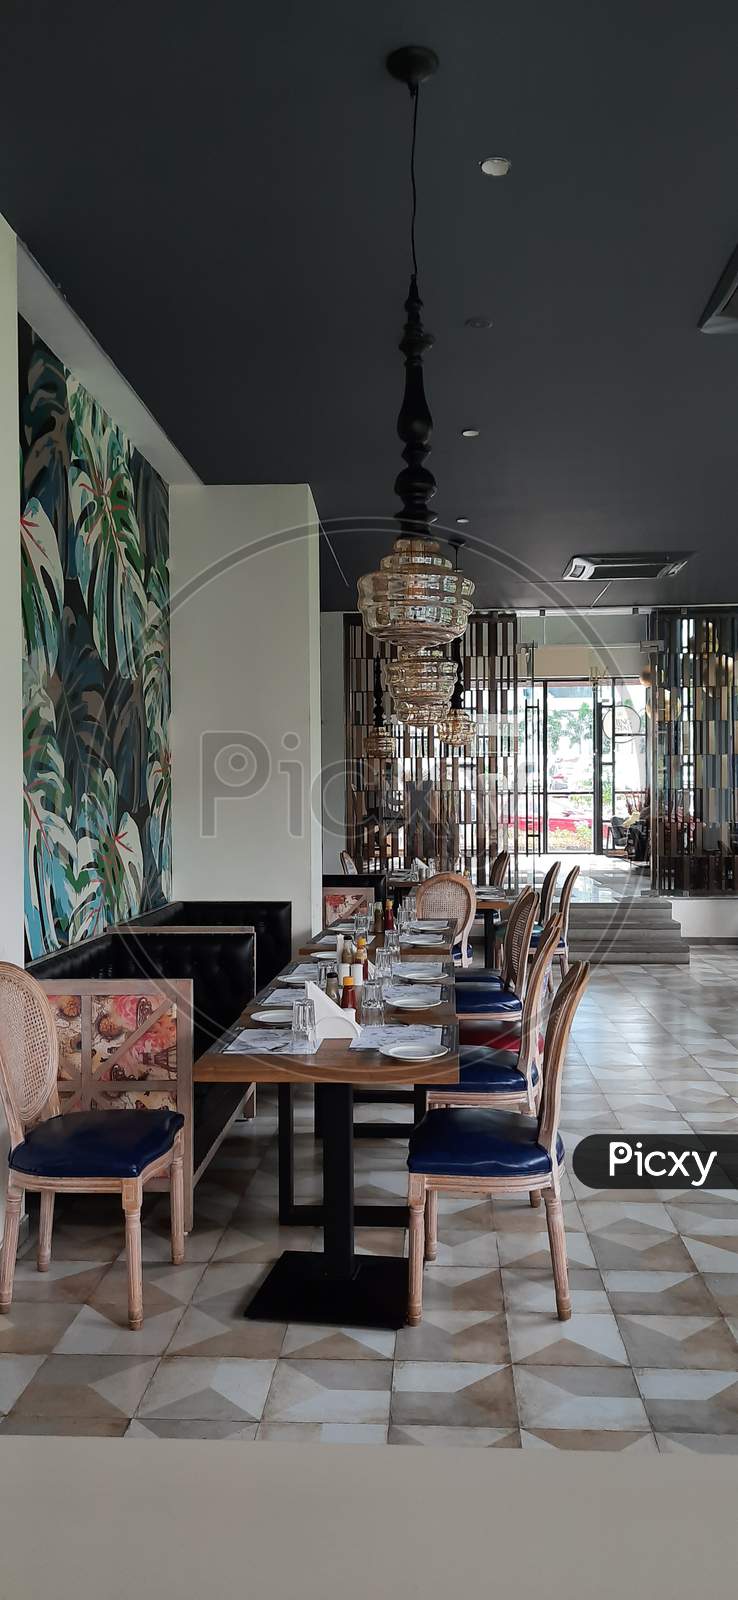 Restaurant Interior Decor with Ambience